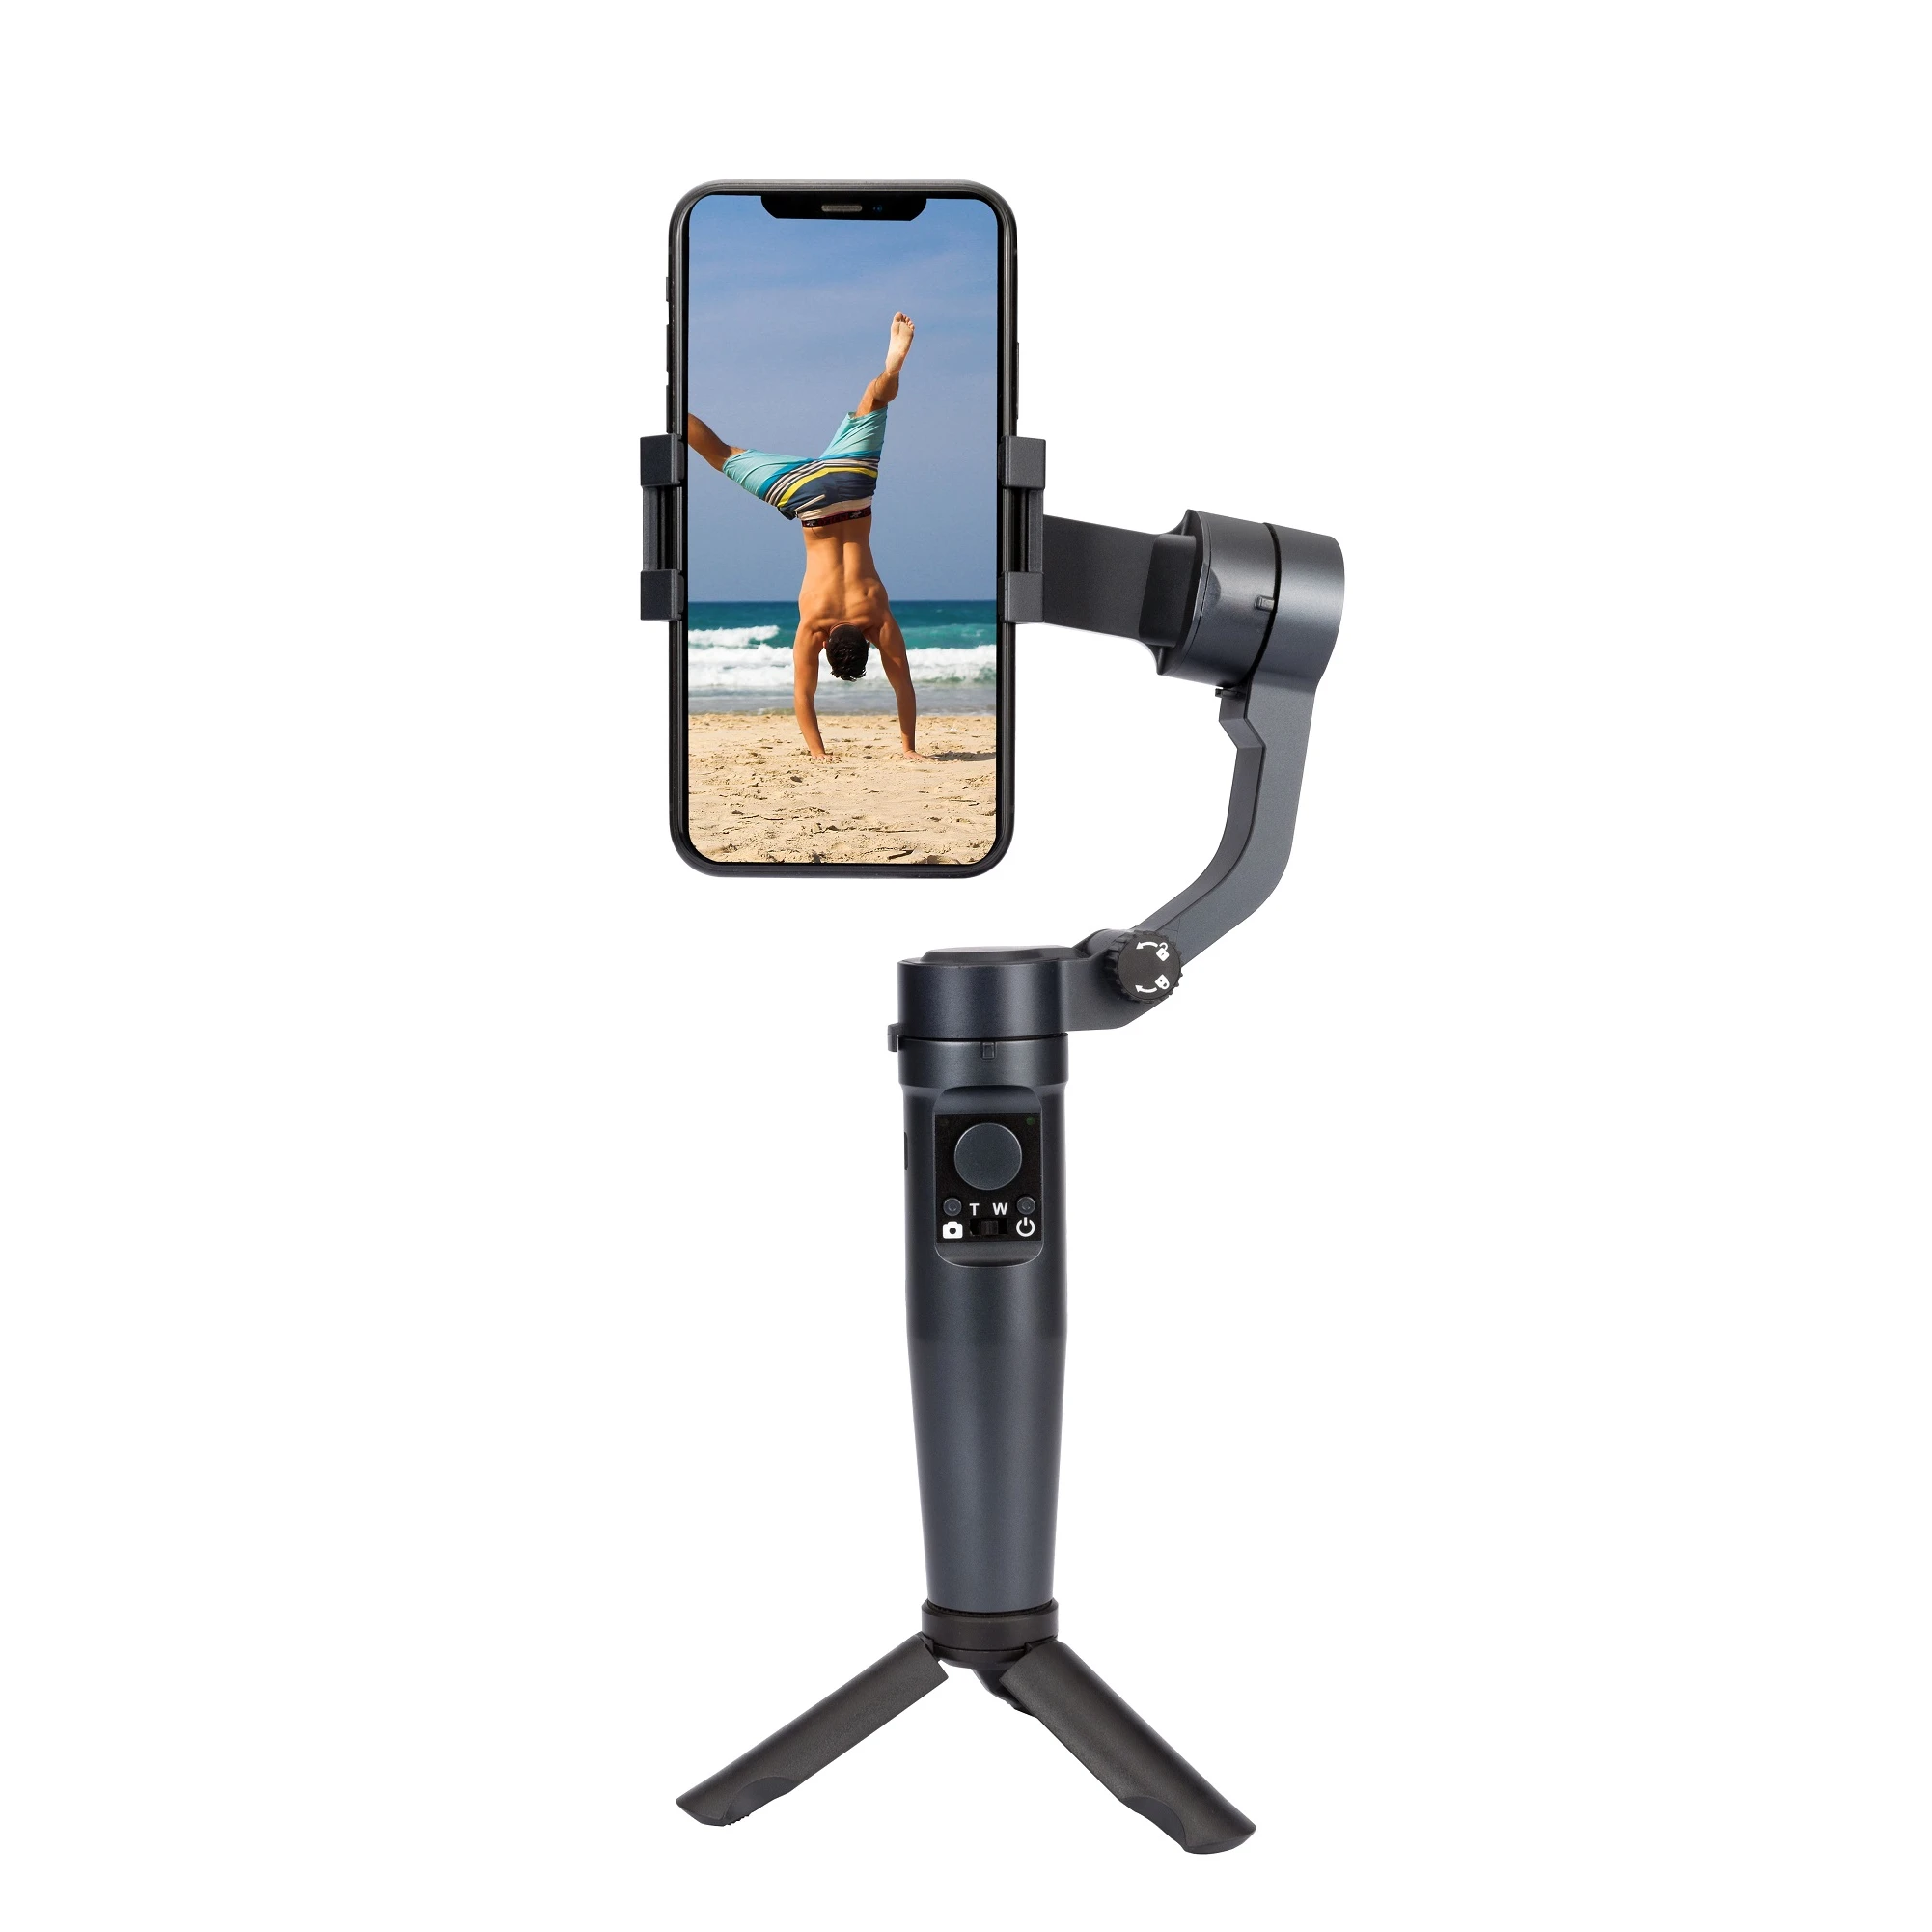 

3-Axis Smartphone Gimbal Handheld Stabilizer Live Video For Iphone Android Vlog Youtube Gamble Gimbal Camera Phone Stabilizer, Black